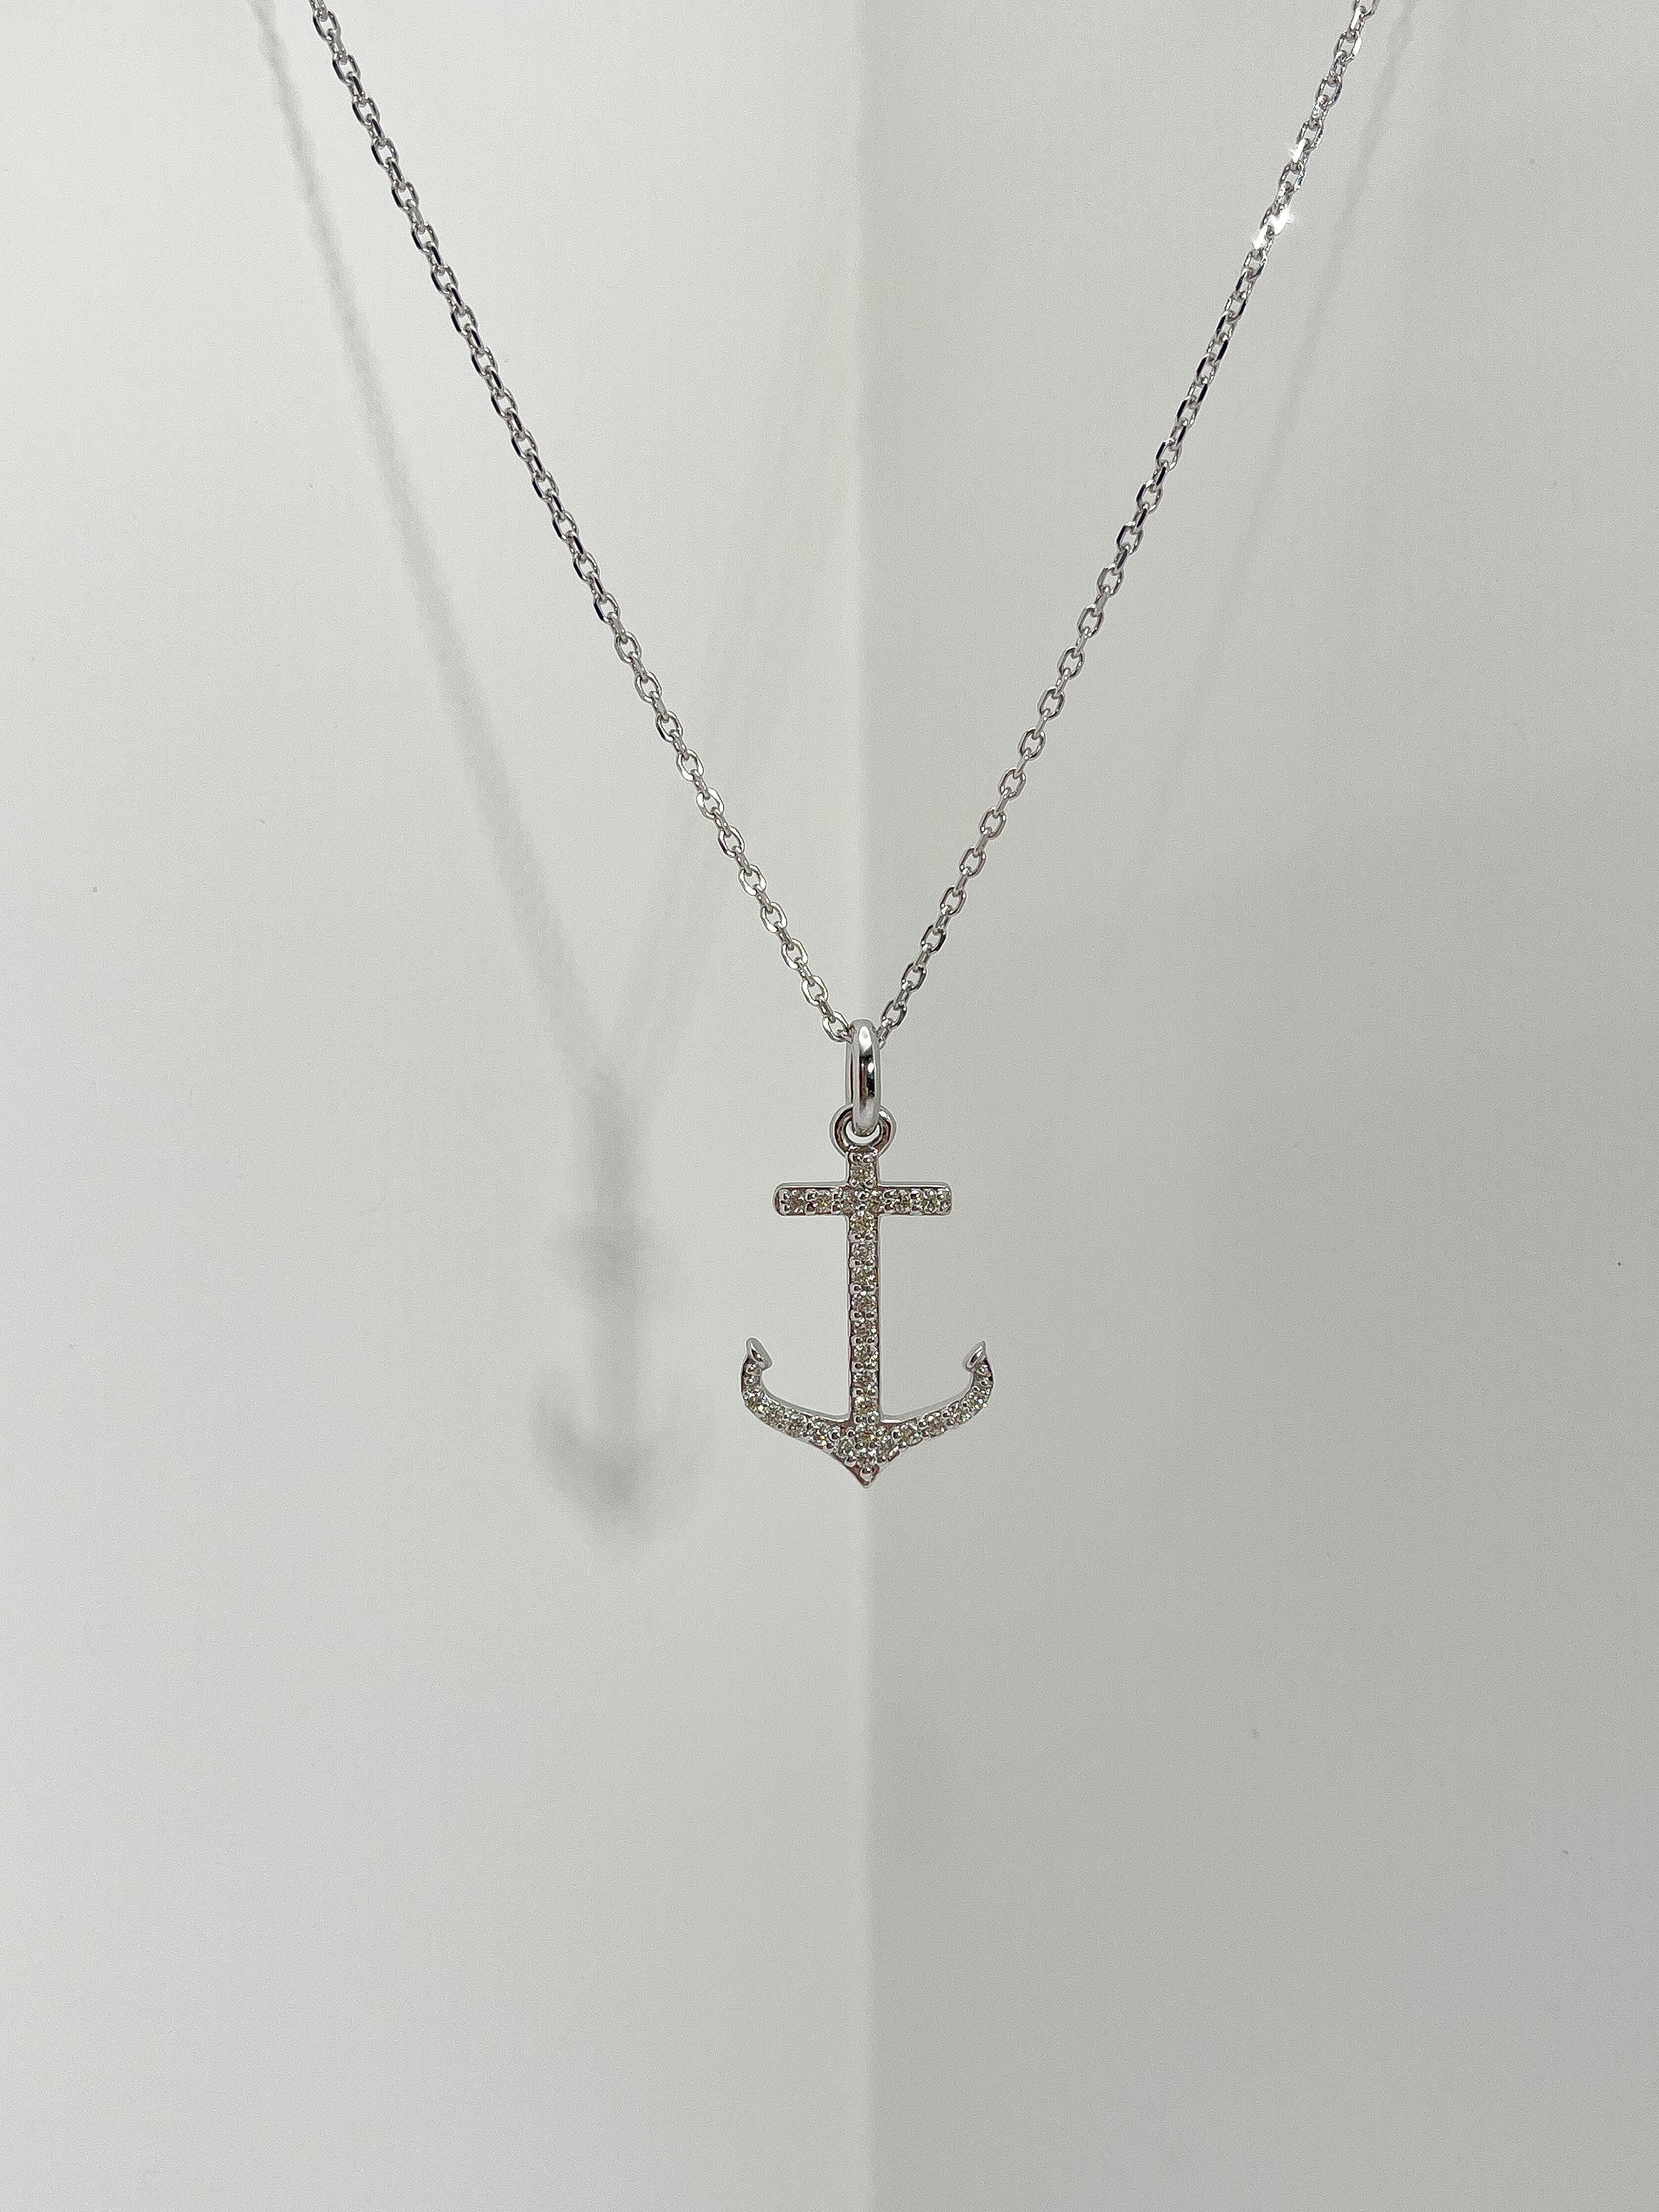 14k white gold .25 CTW diamond anchor pendant necklace. All diamonds in the pendant are round, the pendant measures 23mm x 14.5mm, comes on an 18-inch diamond cut cable chain, has a lobster clasp to open and close, and has a total weight of 4 grams.